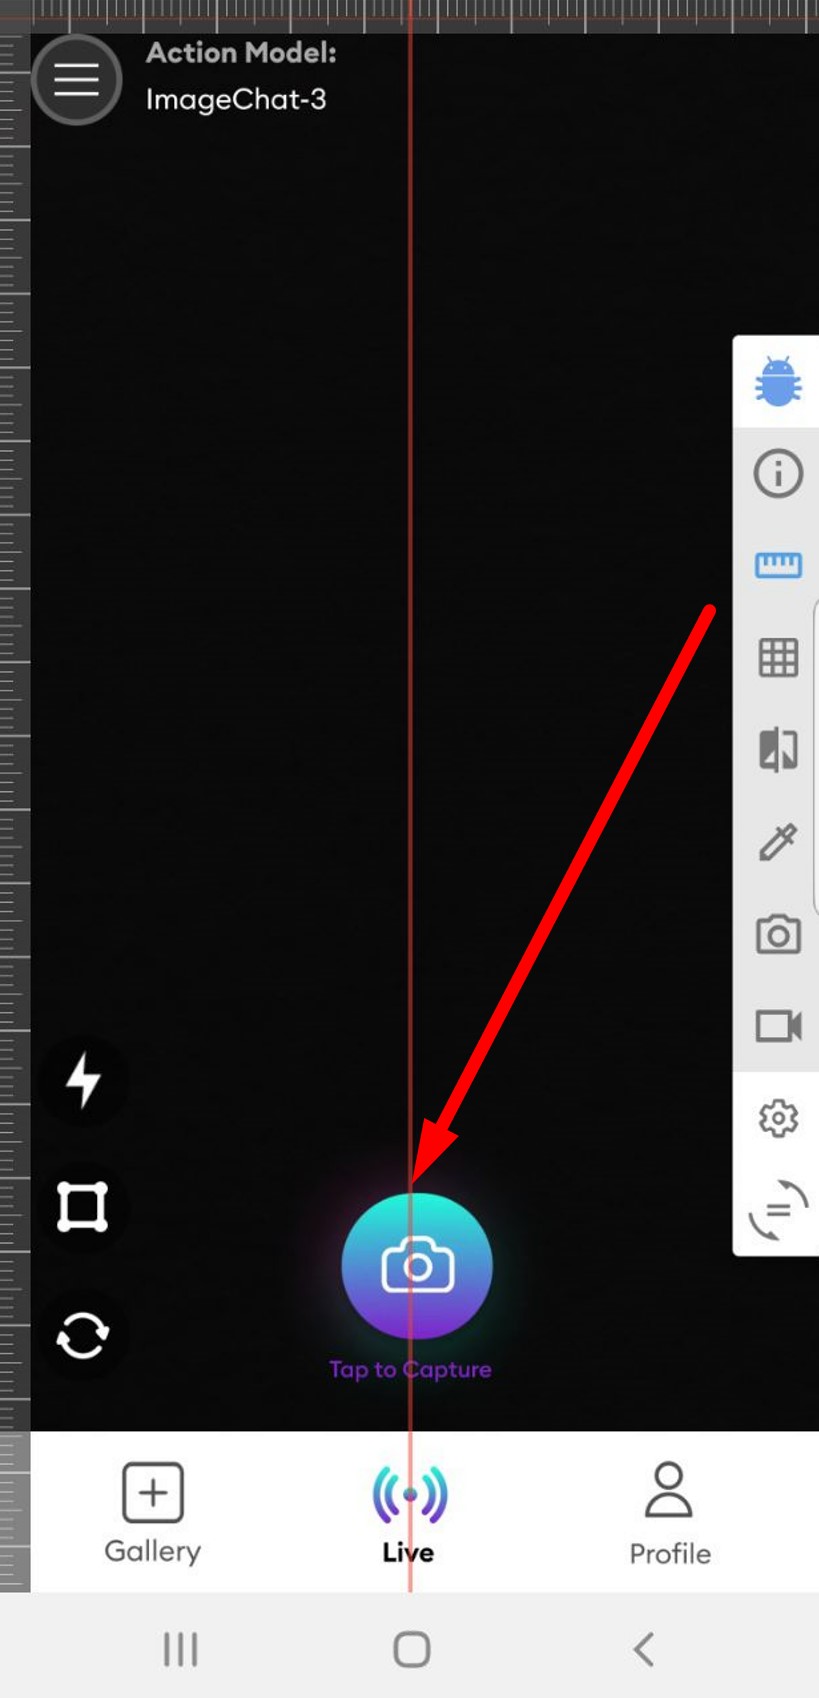 Button to take photo is not in center of screen